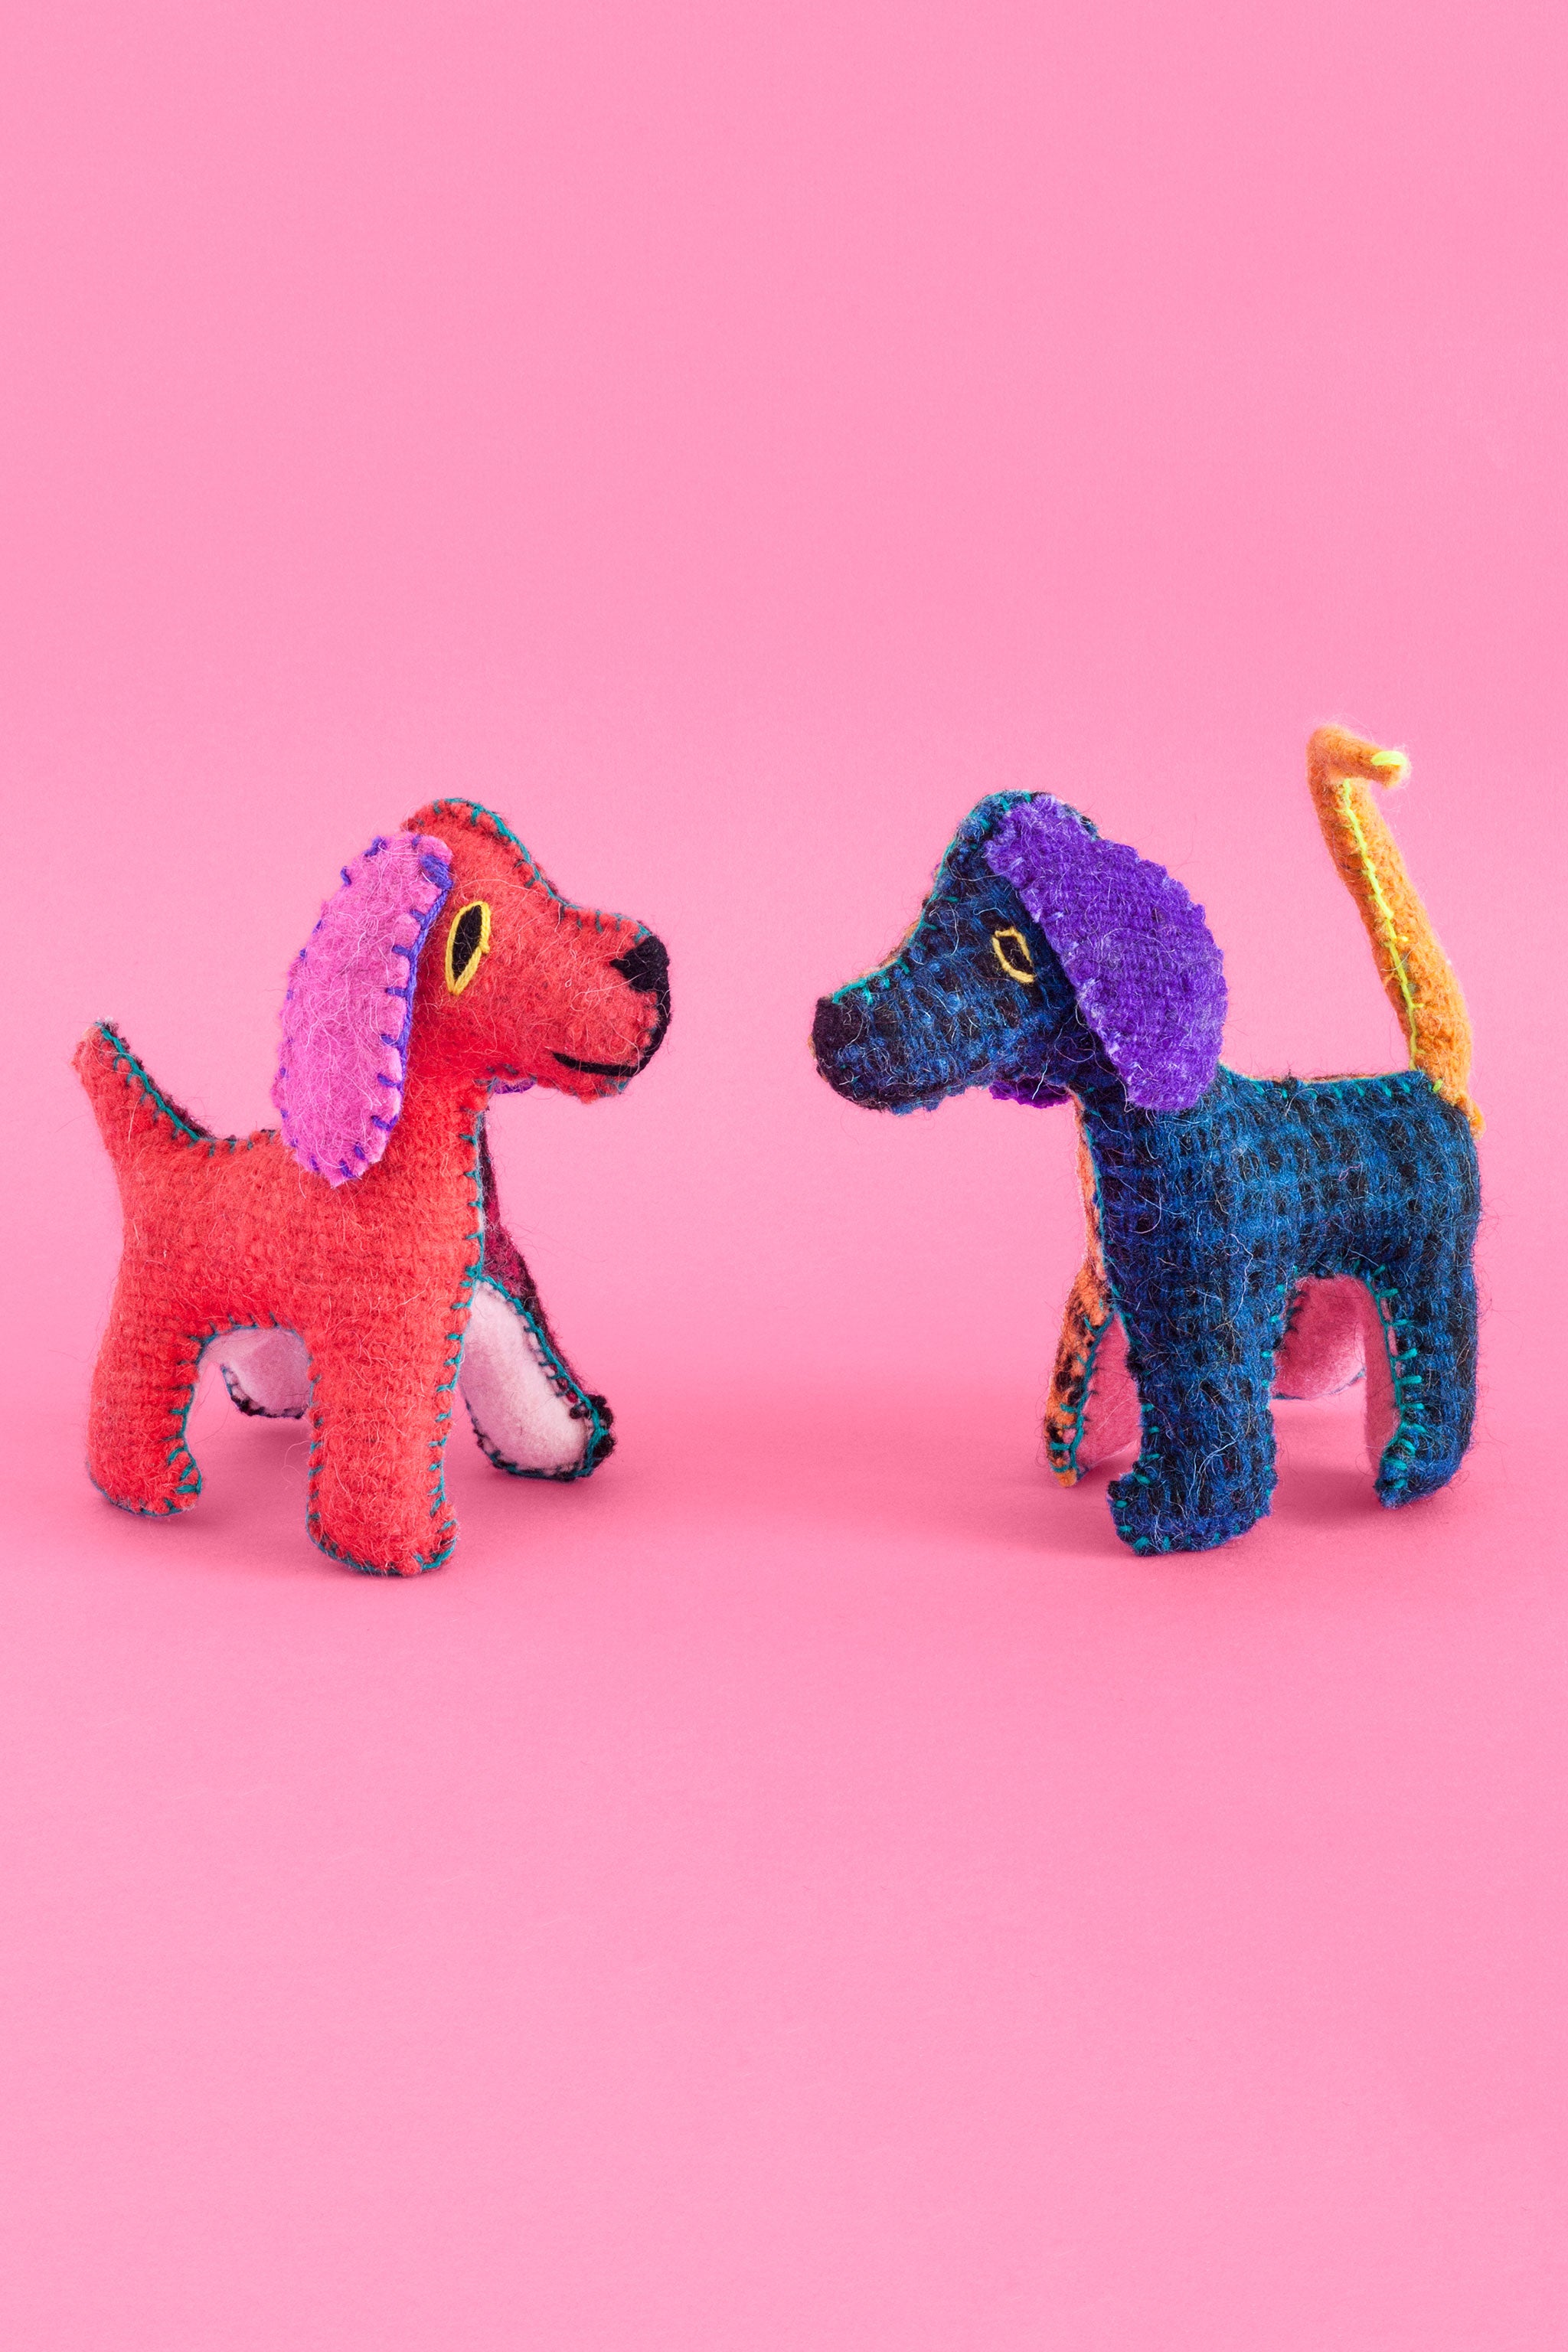 Two colorful felt dog plush toys with hand-embroidered features.